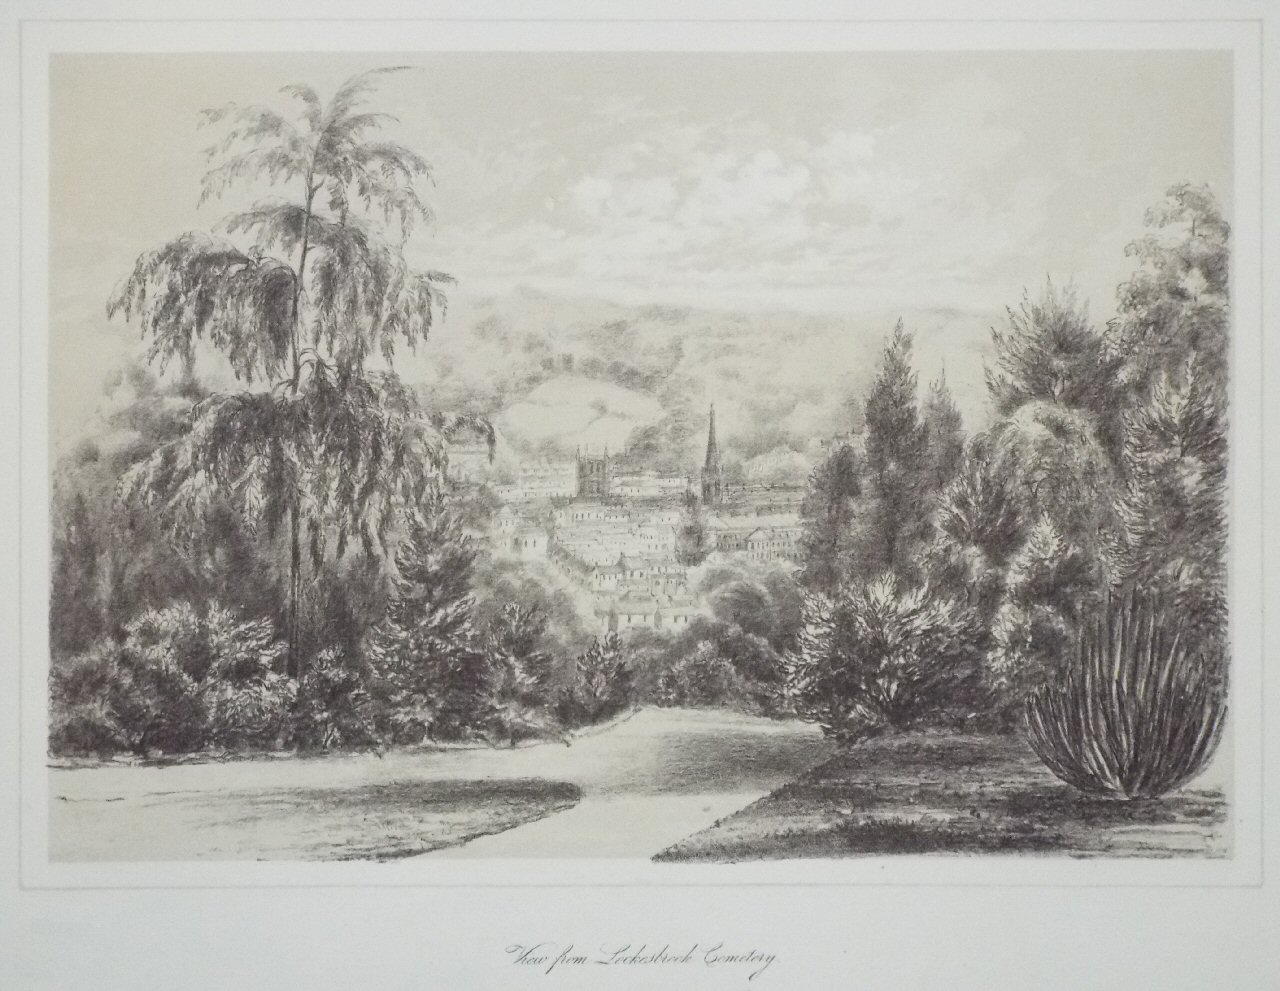 Lithograph - View from Locksbrook Cemetery